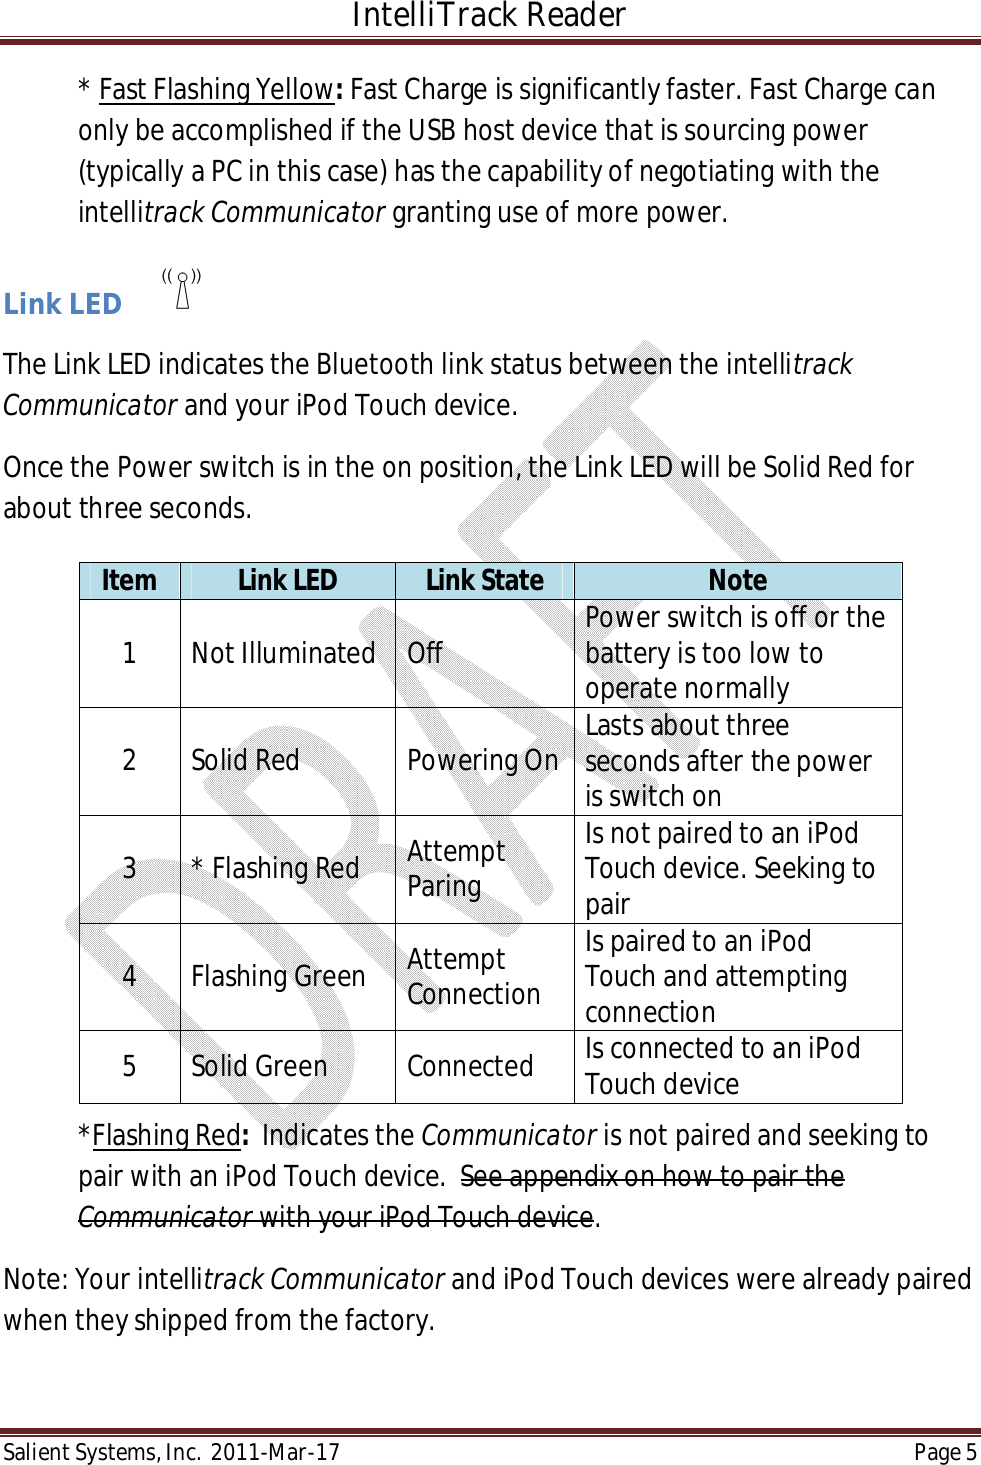 IntelliTrack Reader  Salient Systems, Inc.  2011-Mar-17 Page 5  * Fast Flashing Yellow: Fast Charge is significantly faster. Fast Charge can only be accomplished if the USB host device that is sourcing power (typically a PC in this case) has the capability of negotiating with the intellitrack Communicator granting use of more power.  Link LED        The Link LED indicates the Bluetooth link status between the intellitrack Communicator and your iPod Touch device. Once the Power switch is in the on position, the Link LED will be Solid Red for about three seconds.       *Flashing Red:  Indicates the Communicator is not paired and seeking to pair with an iPod Touch device.  See appendix on how to pair the Communicator with your iPod Touch device.  Note: Your intellitrack Communicator and iPod Touch devices were already paired when they shipped from the factory.  Item  Link LED  Link State  Note 1  Not Illuminated  Off  Power switch is off or the battery is too low to operate normally 2  Solid Red  Powering On Lasts about three seconds after the power is switch on 3  * Flashing Red  Attempt Paring Is not paired to an iPod Touch device. Seeking to pair 4  Flashing Green  Attempt Connection Is paired to an iPod Touch and attempting connection 5  Solid Green  Connected  Is connected to an iPod Touch device 